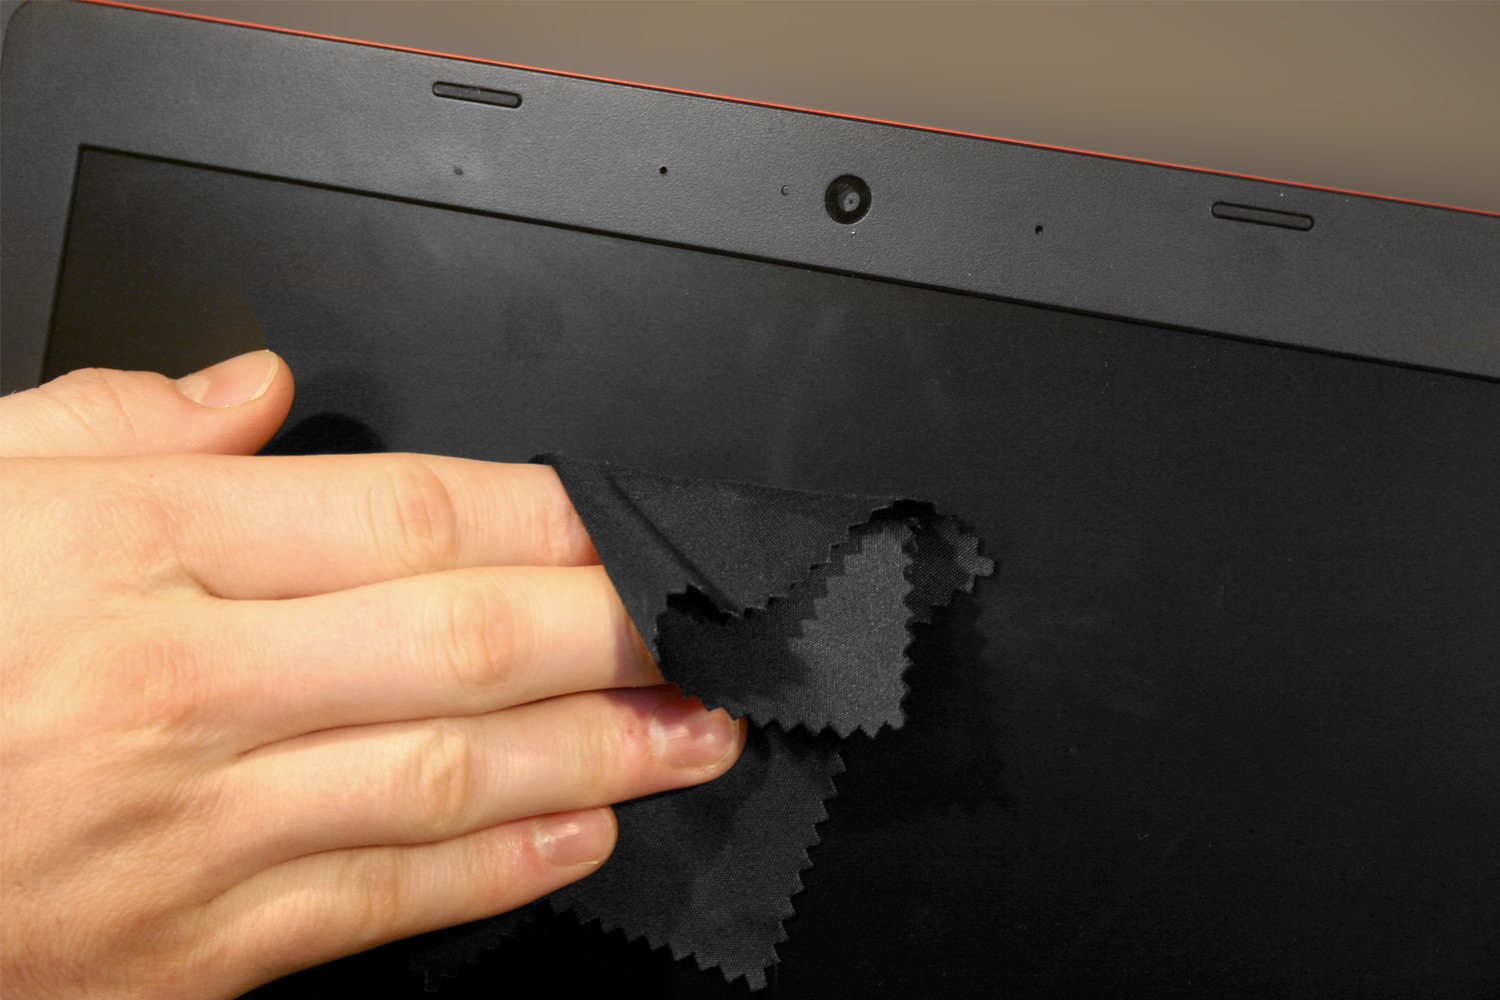 Person's hand cleaning a laptop screen with a microfiber cloth.